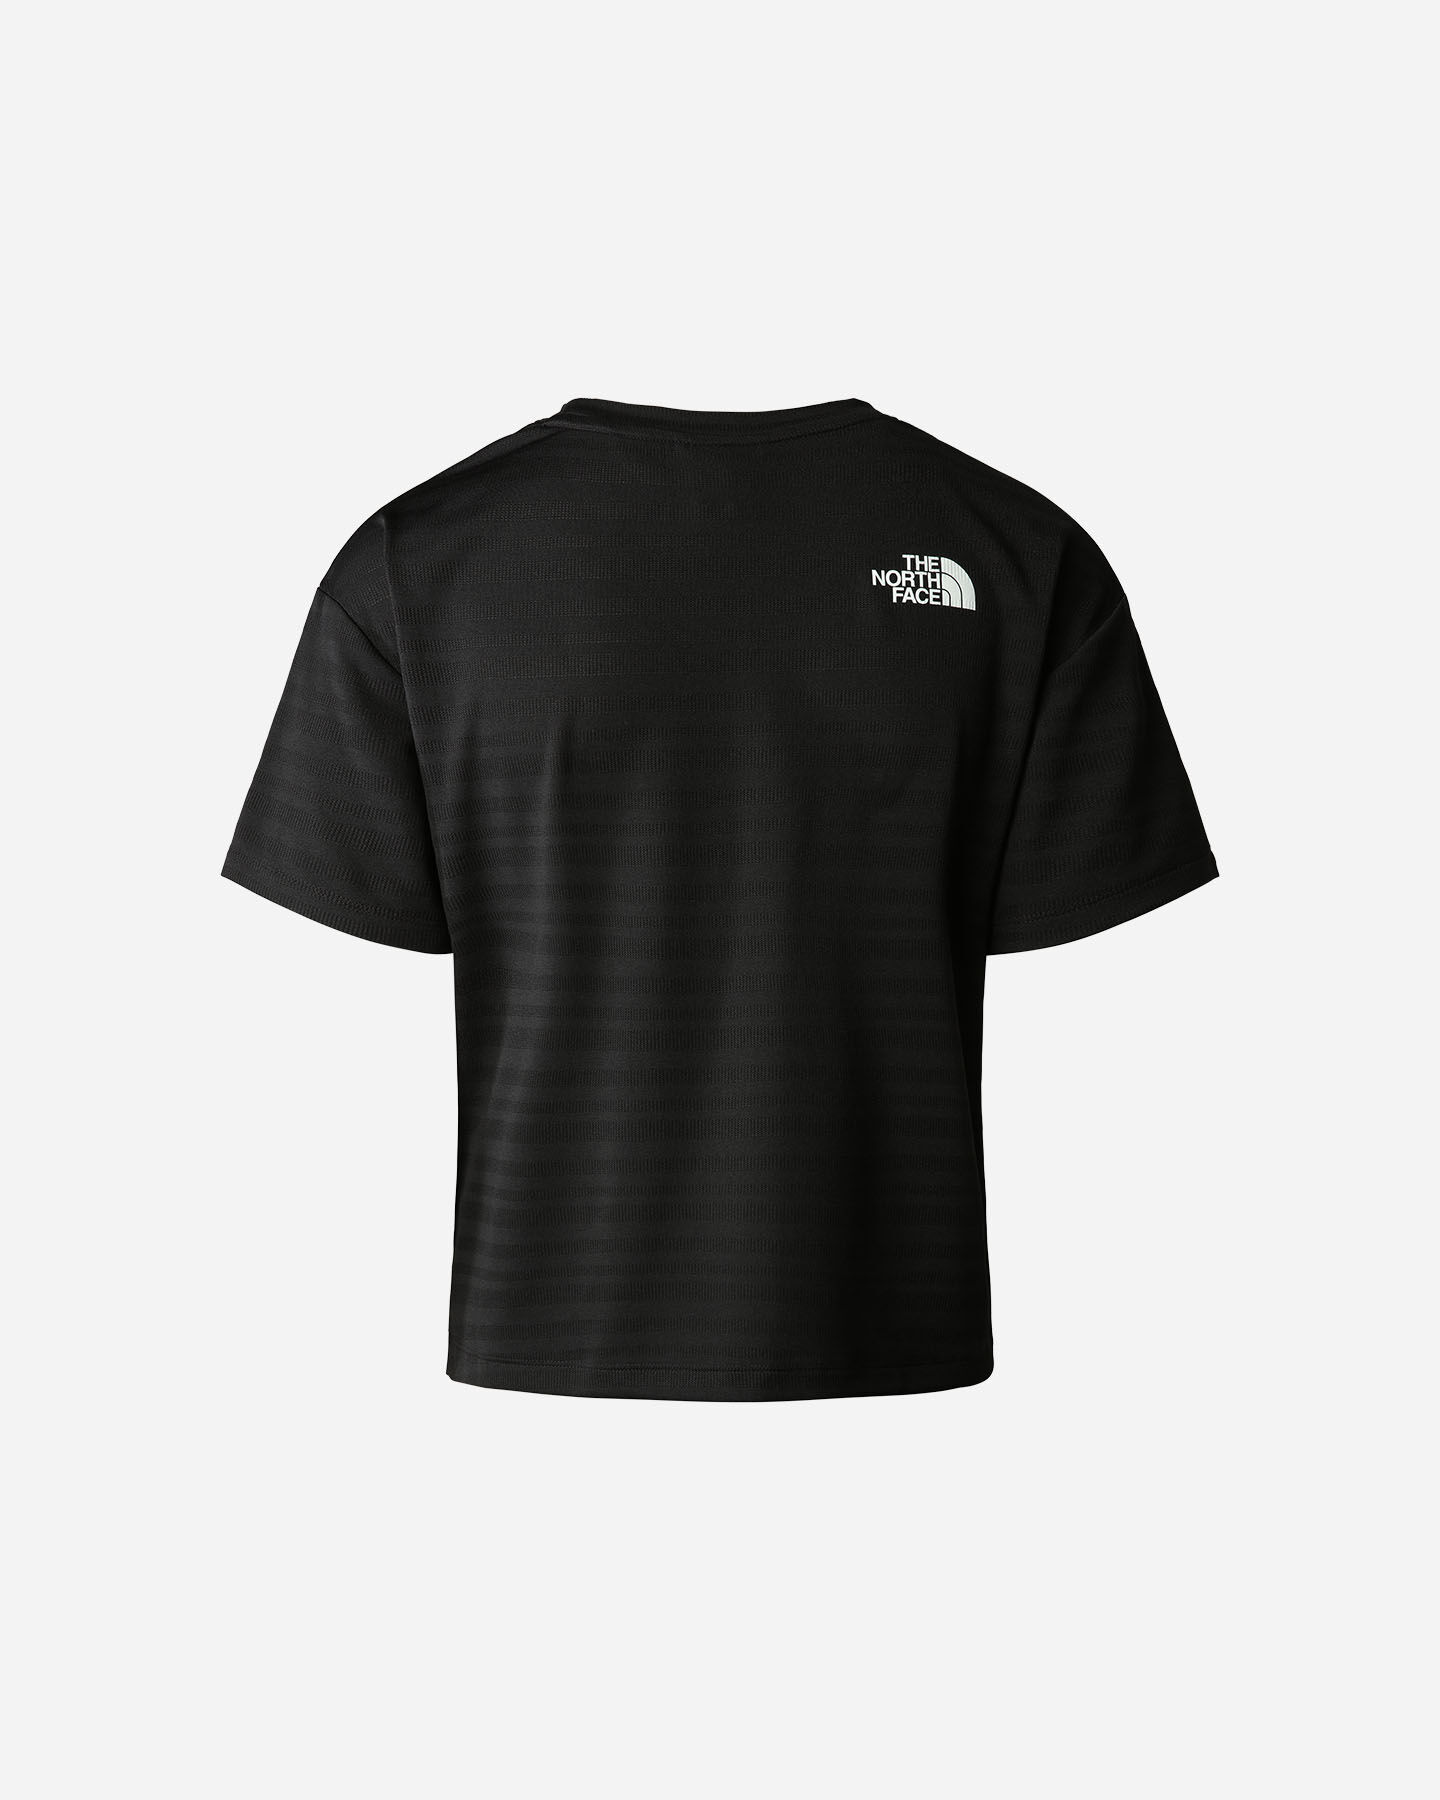  T-Shirt THE NORTH FACE MOUNTAIN ATHLETICS W S5537060|JK3|XS scatto 1